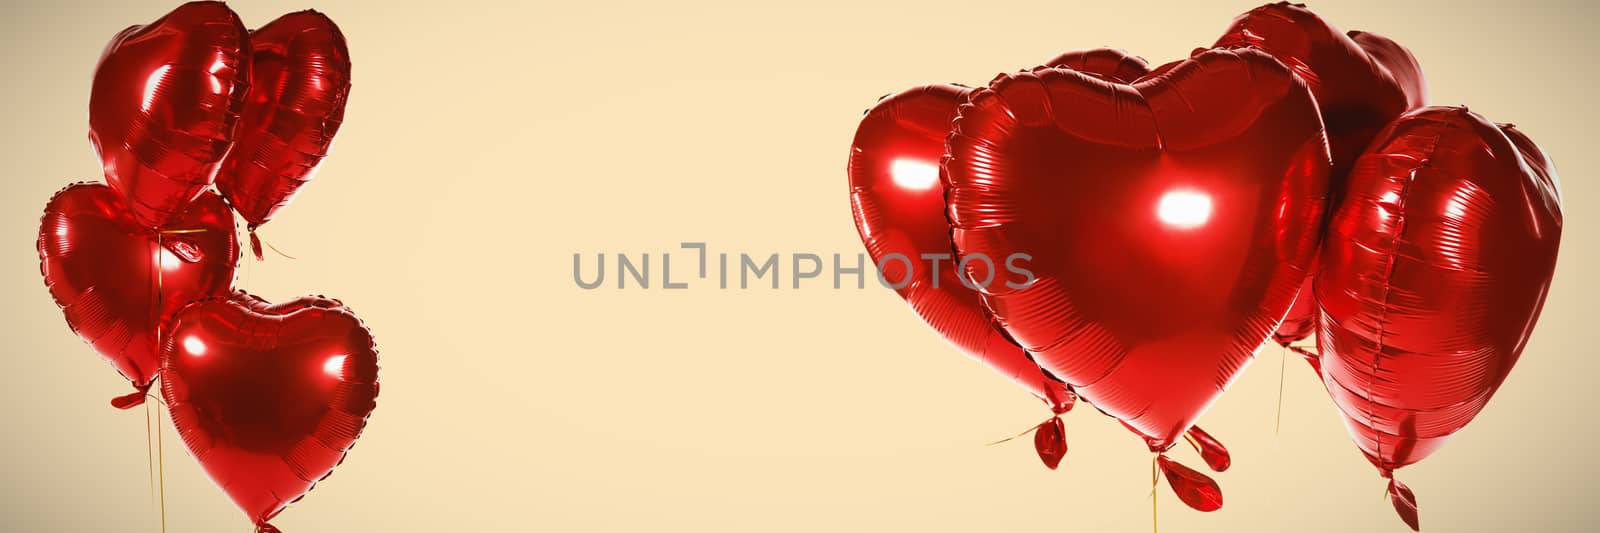 Composite image of red heart shape balloons by Wavebreakmedia